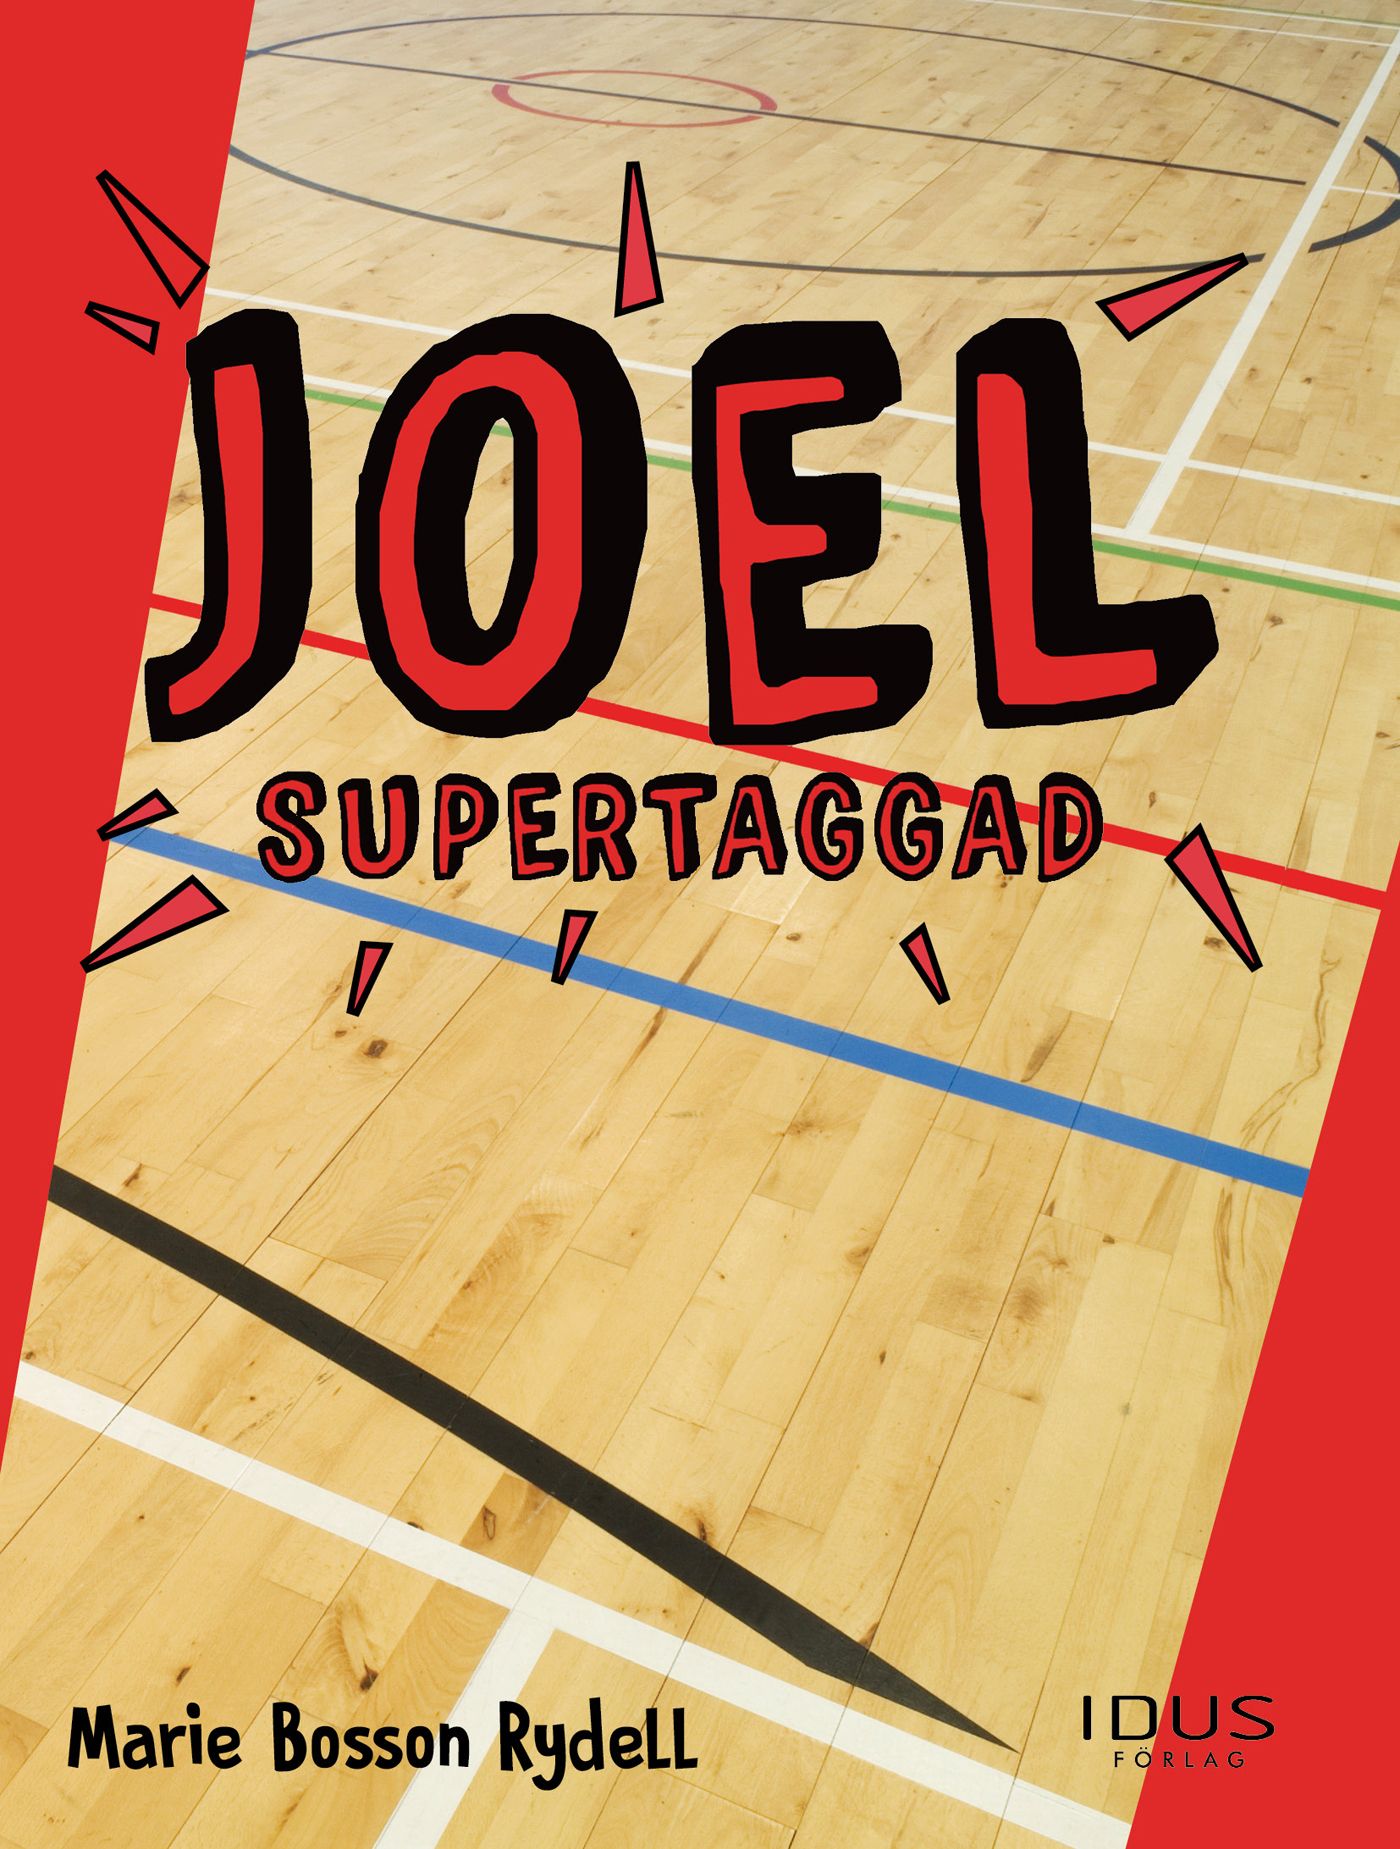 Joel - Supertaggad, eBook by Marie Bosson Rydell